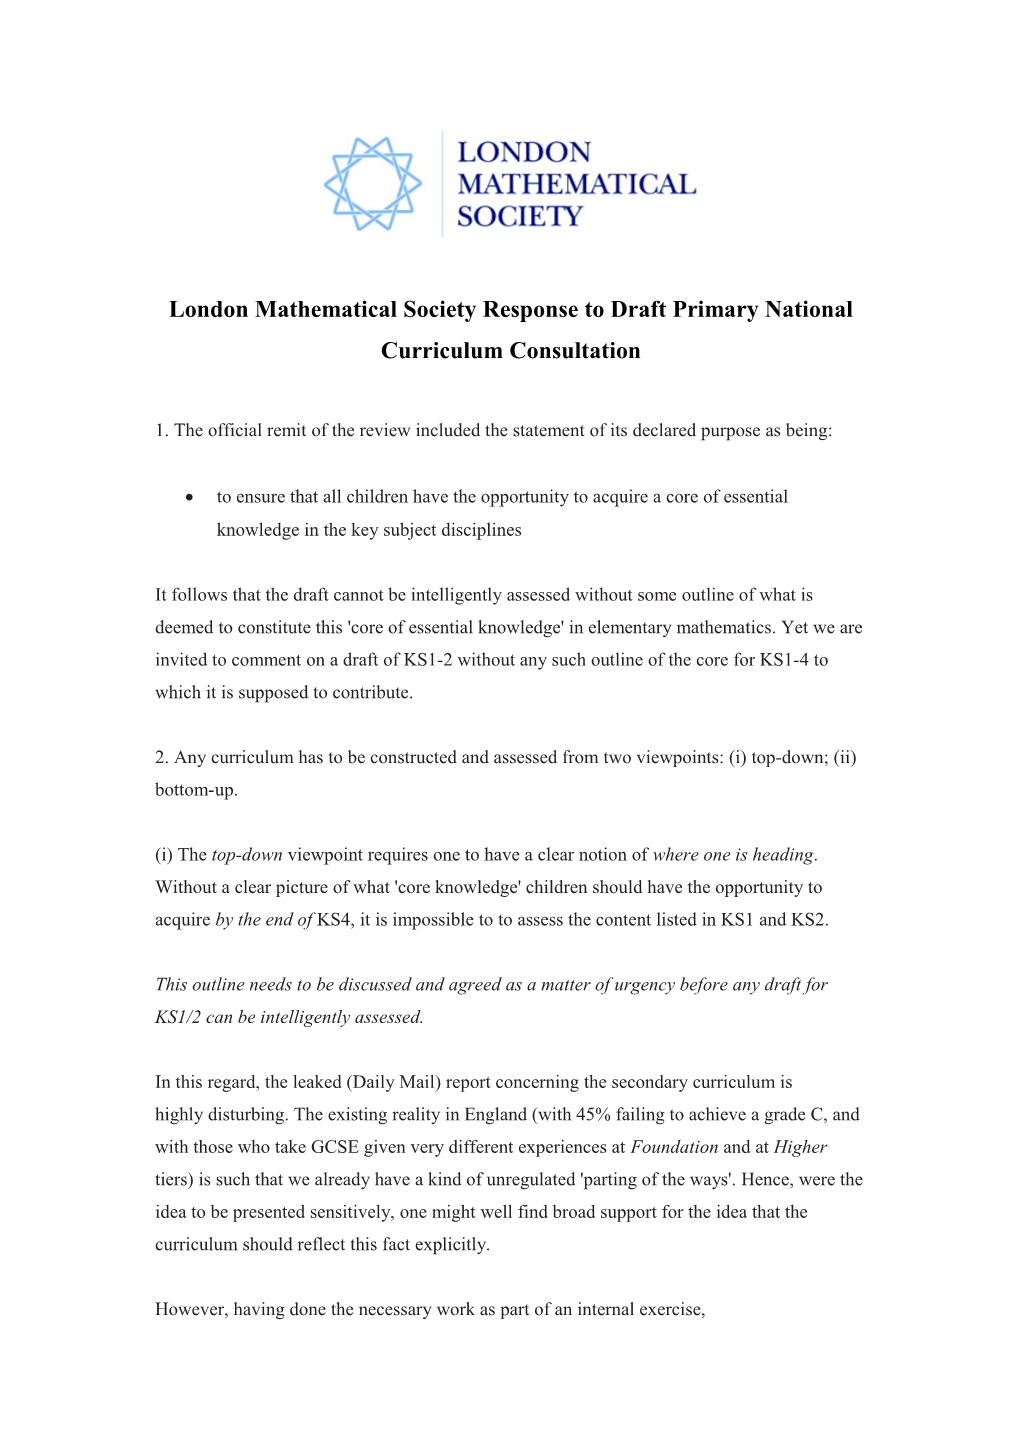 London Mathematical Society Response to Draft Primary National Curriculum Consultation